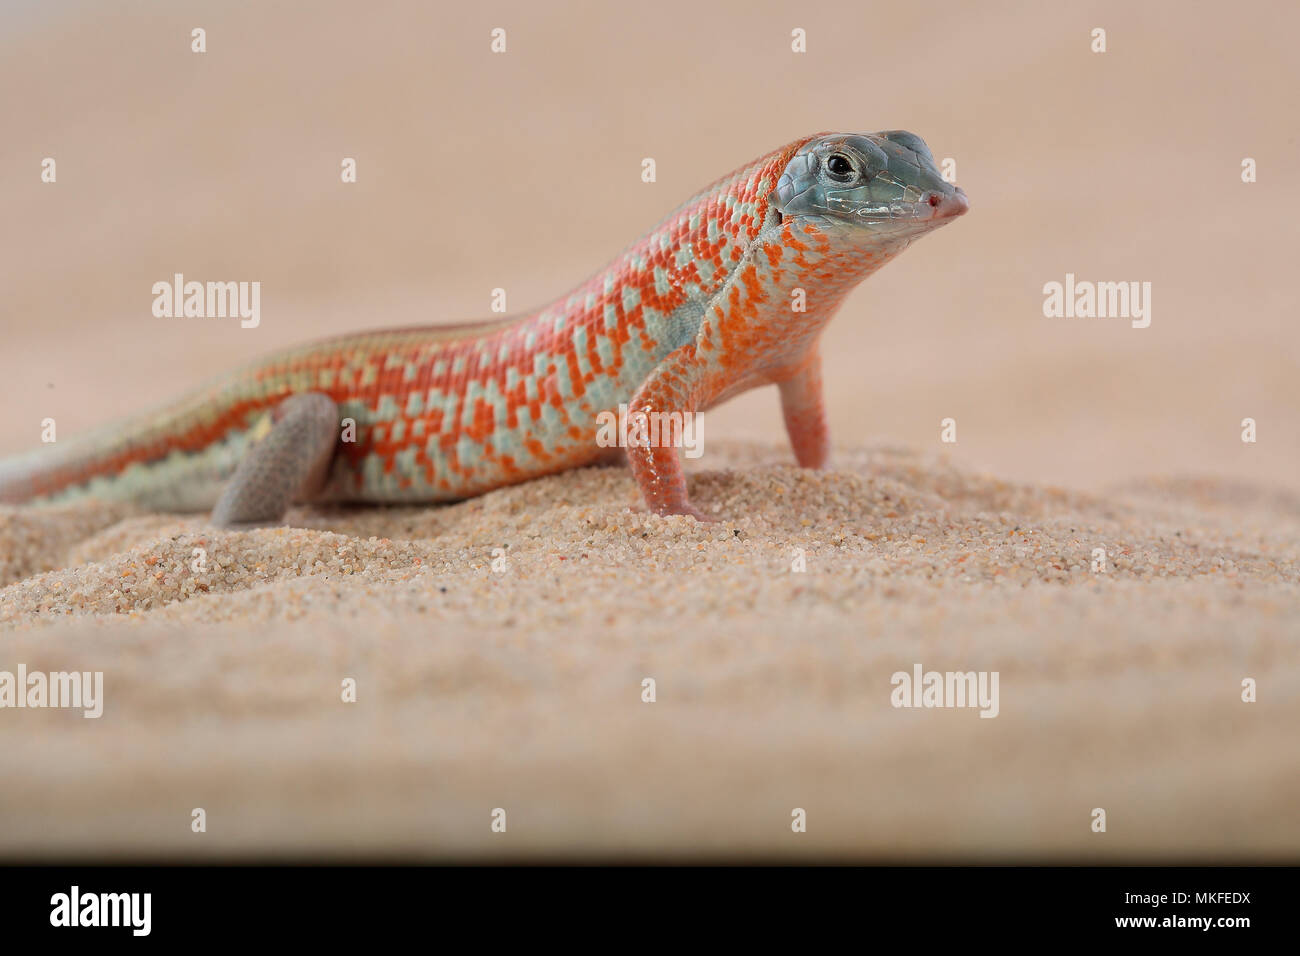 Peters' keeled cordylid (Tracheloptychus petersi) on sand, in terrarium Stock Photo